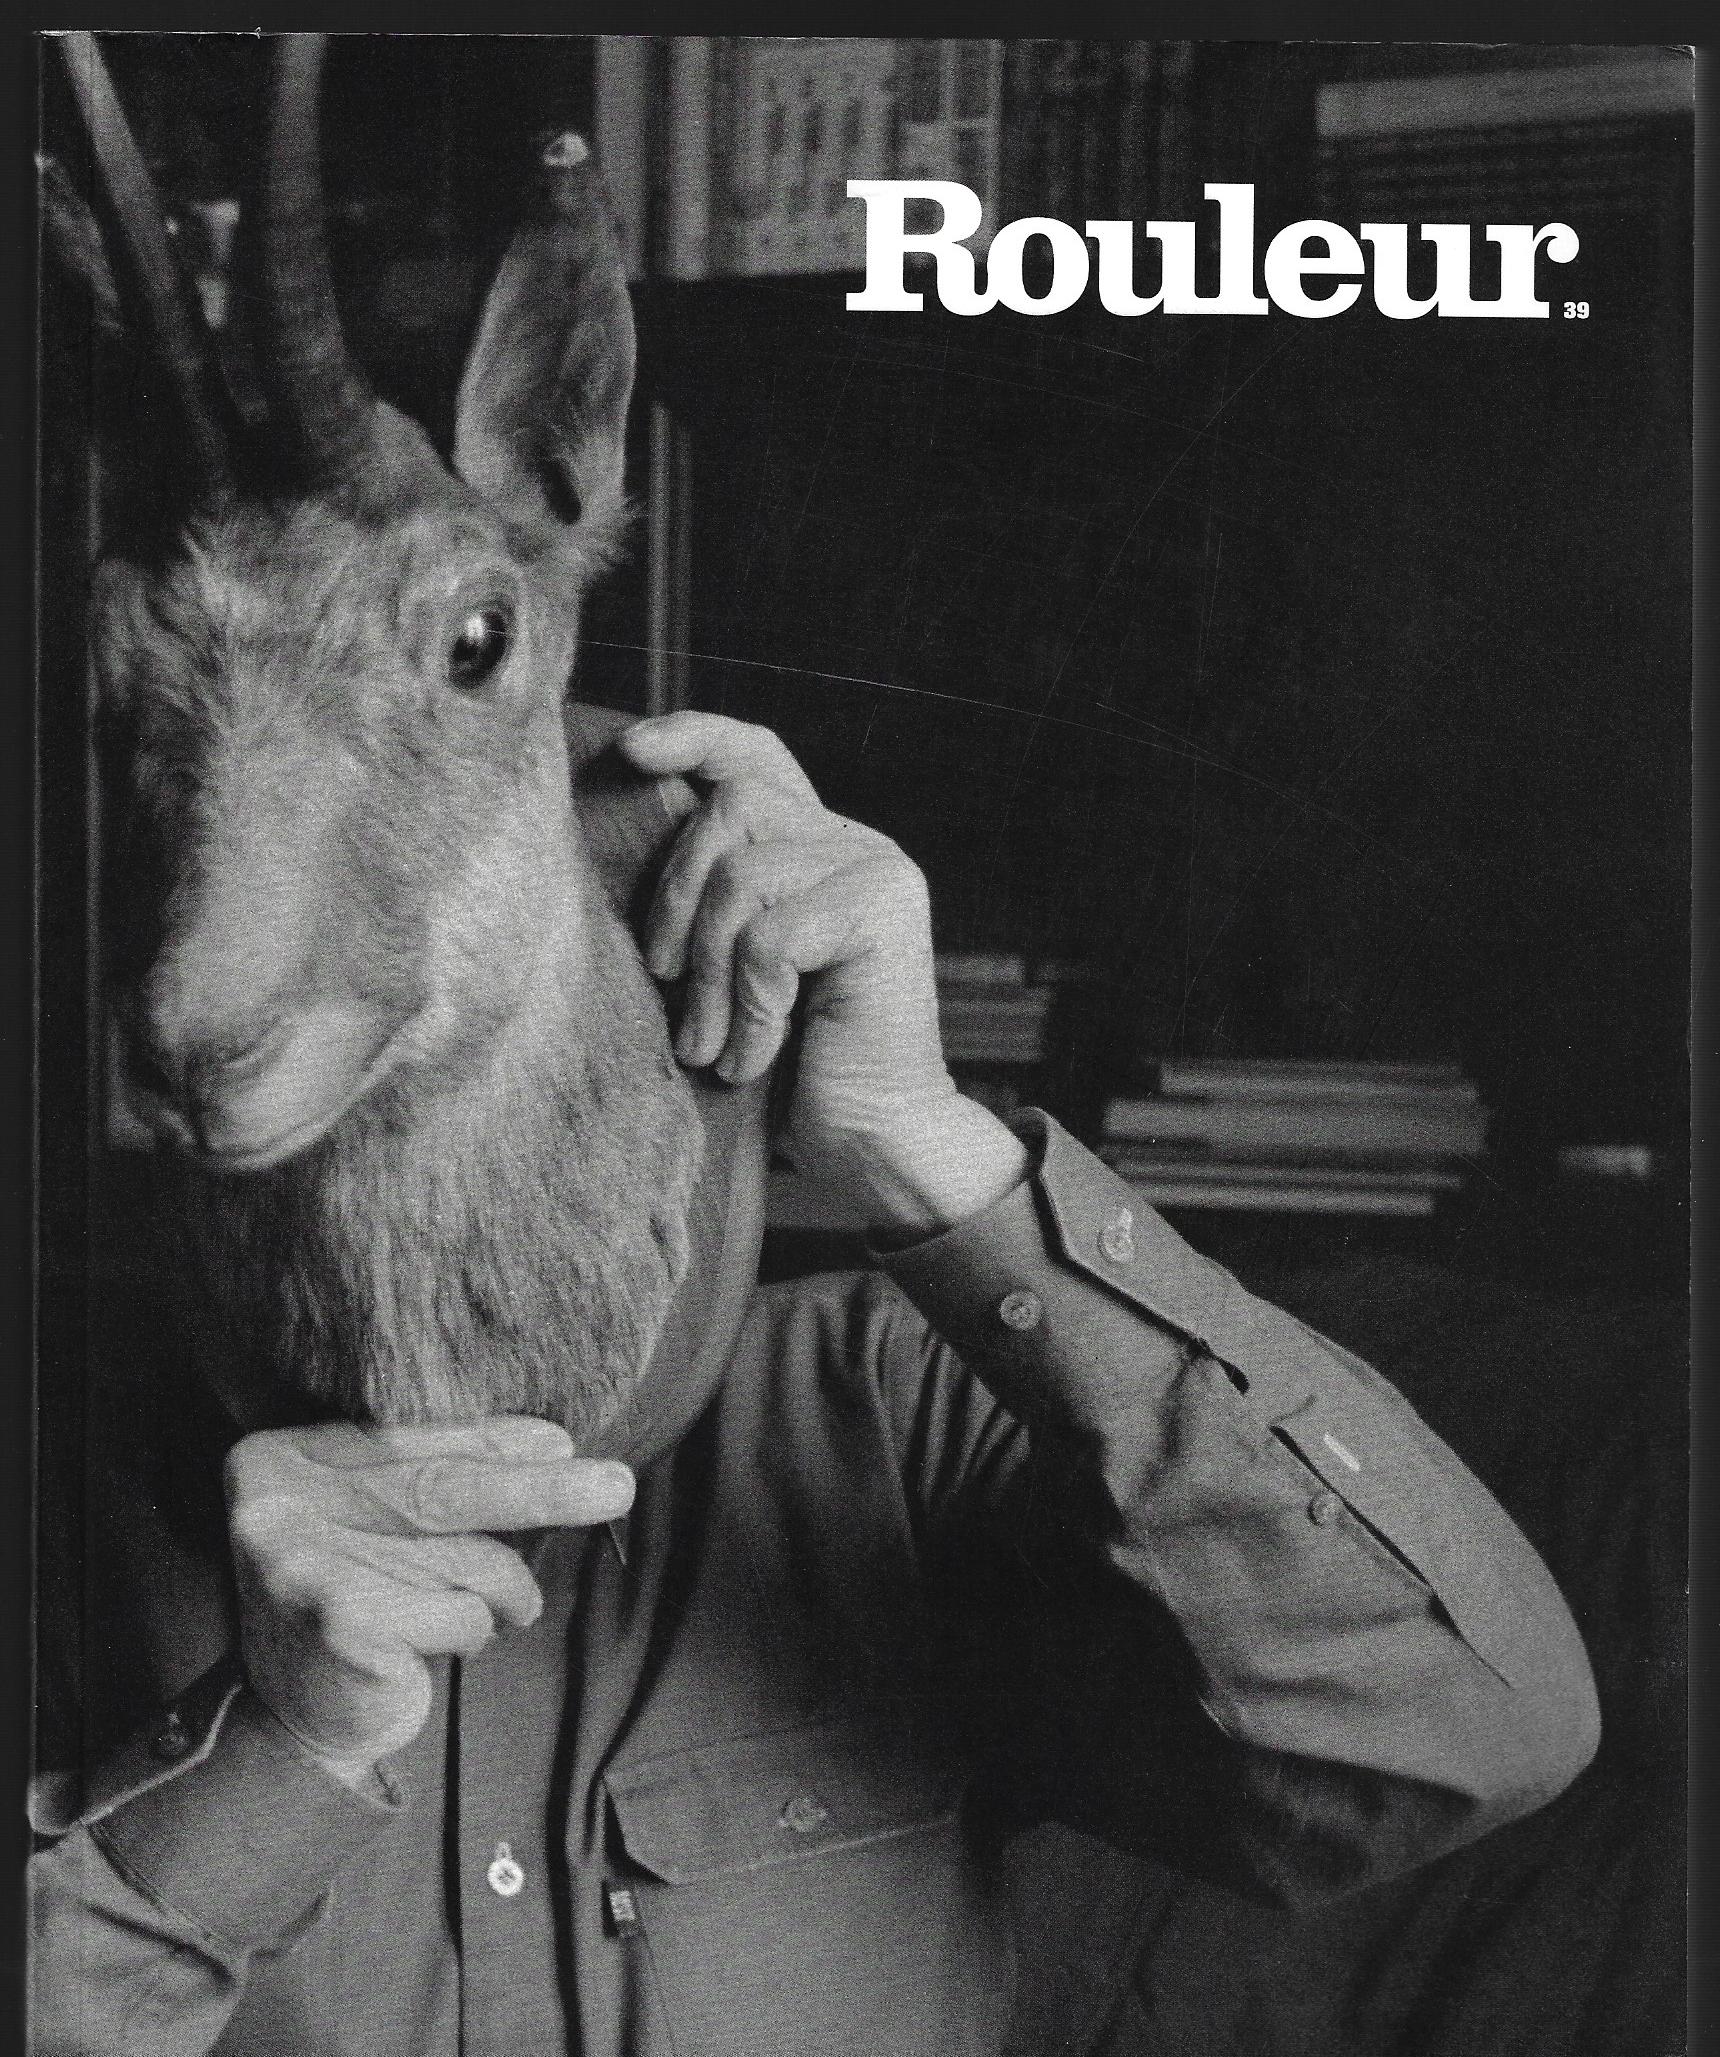 Many - Rouleur issue 39